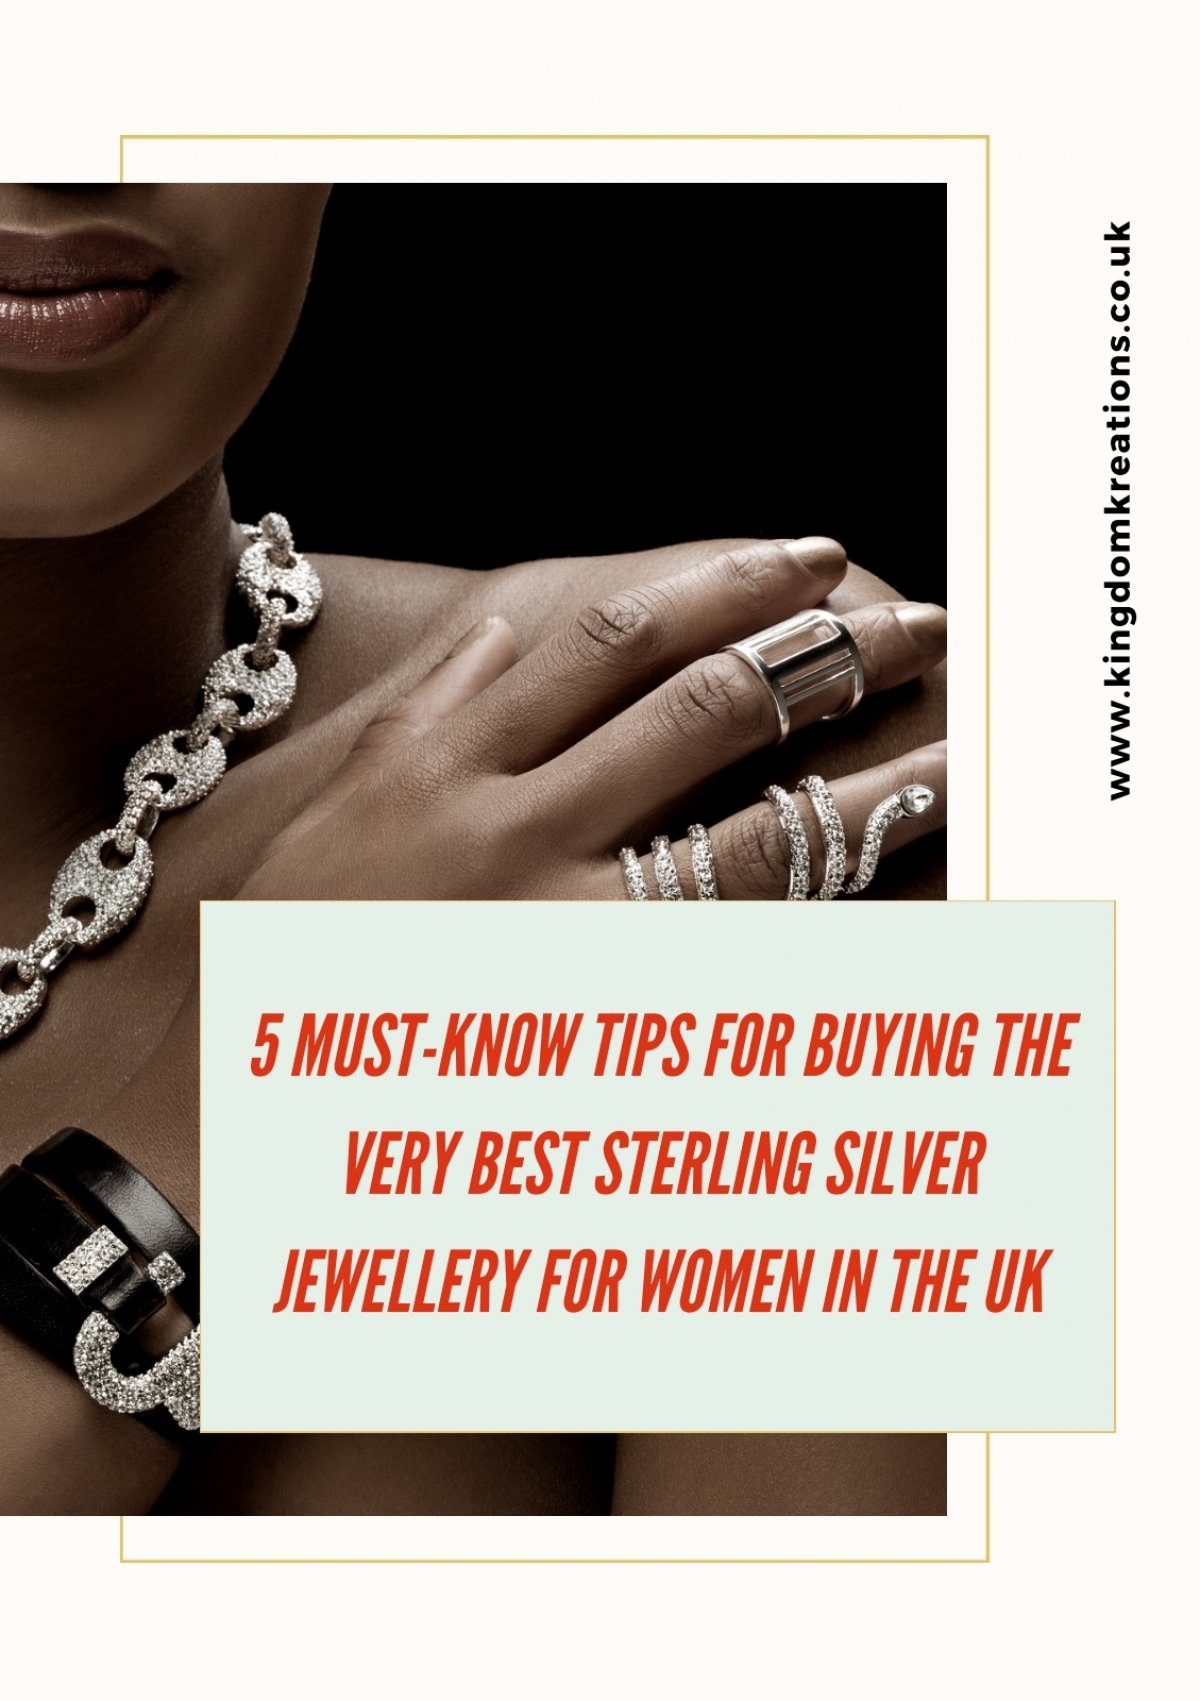 5 MUST-KNOW TIPS FOR BUYING THE VERY BEST STERLING SILVER JEWELLERY FOR ...